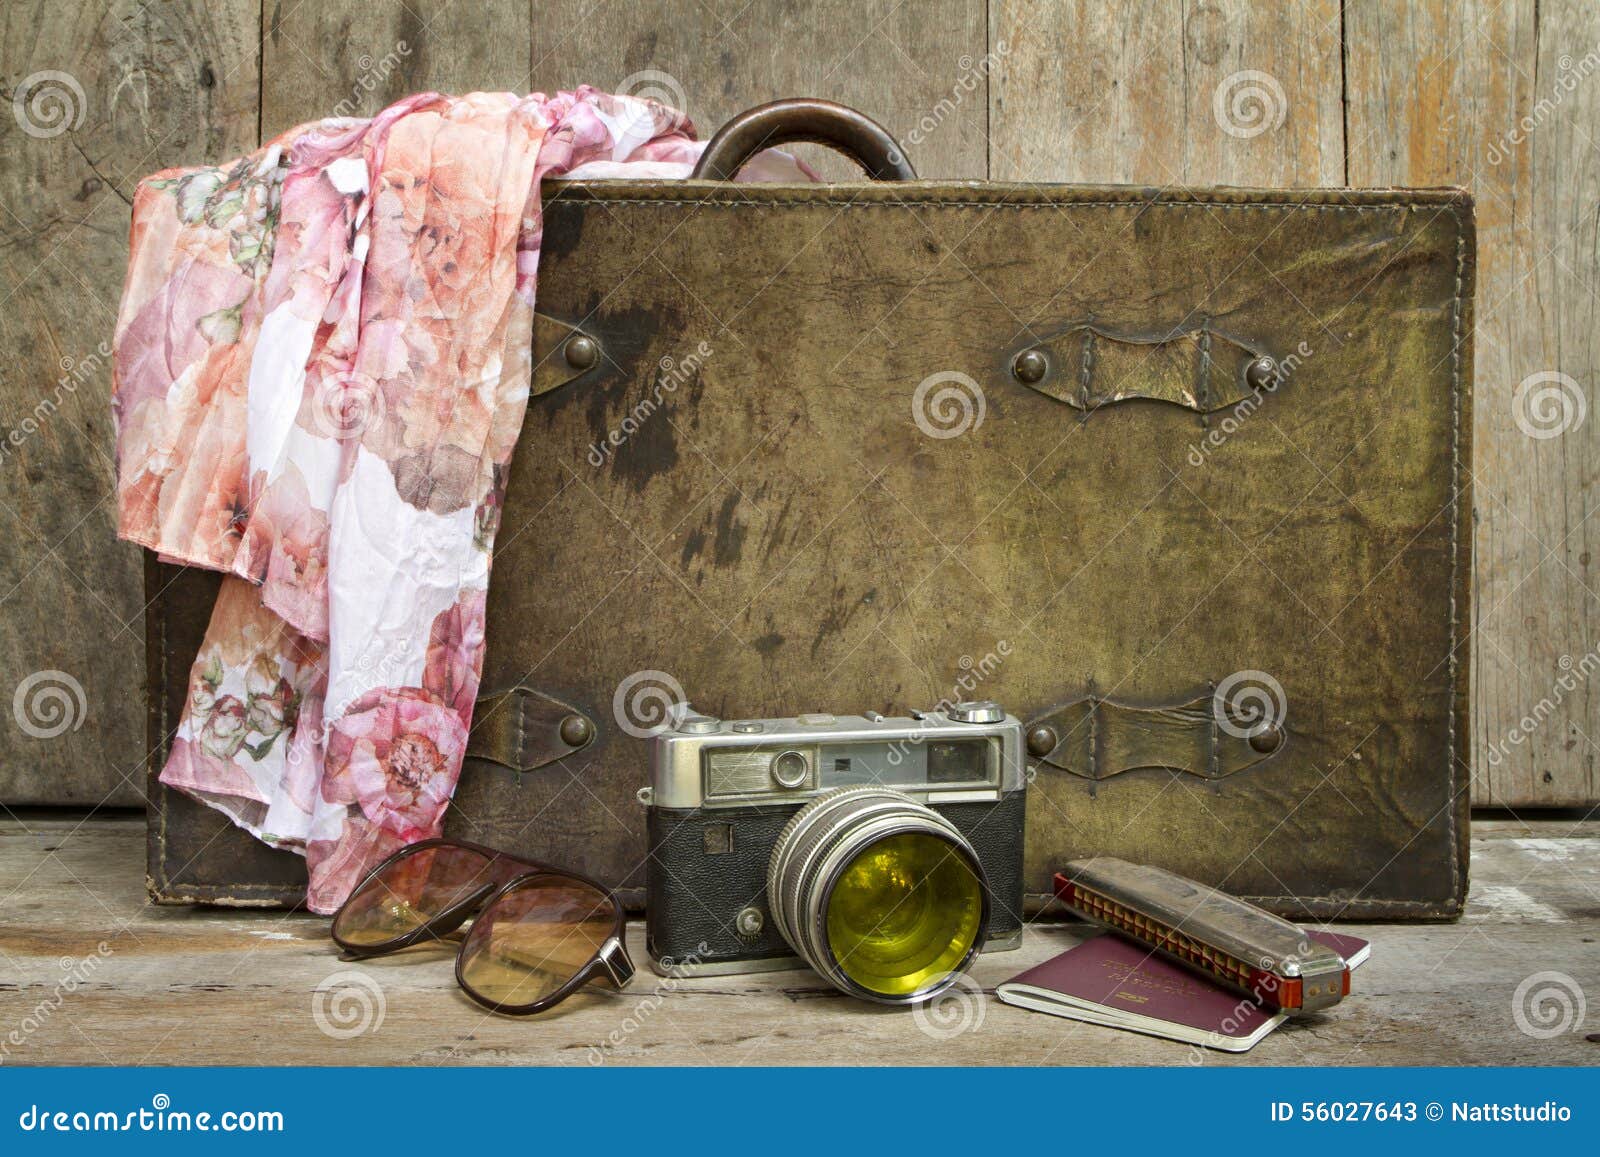 traveling concept of retro consists suitcase, camera, sunglasses, mouth organ, shawl and on wooden background